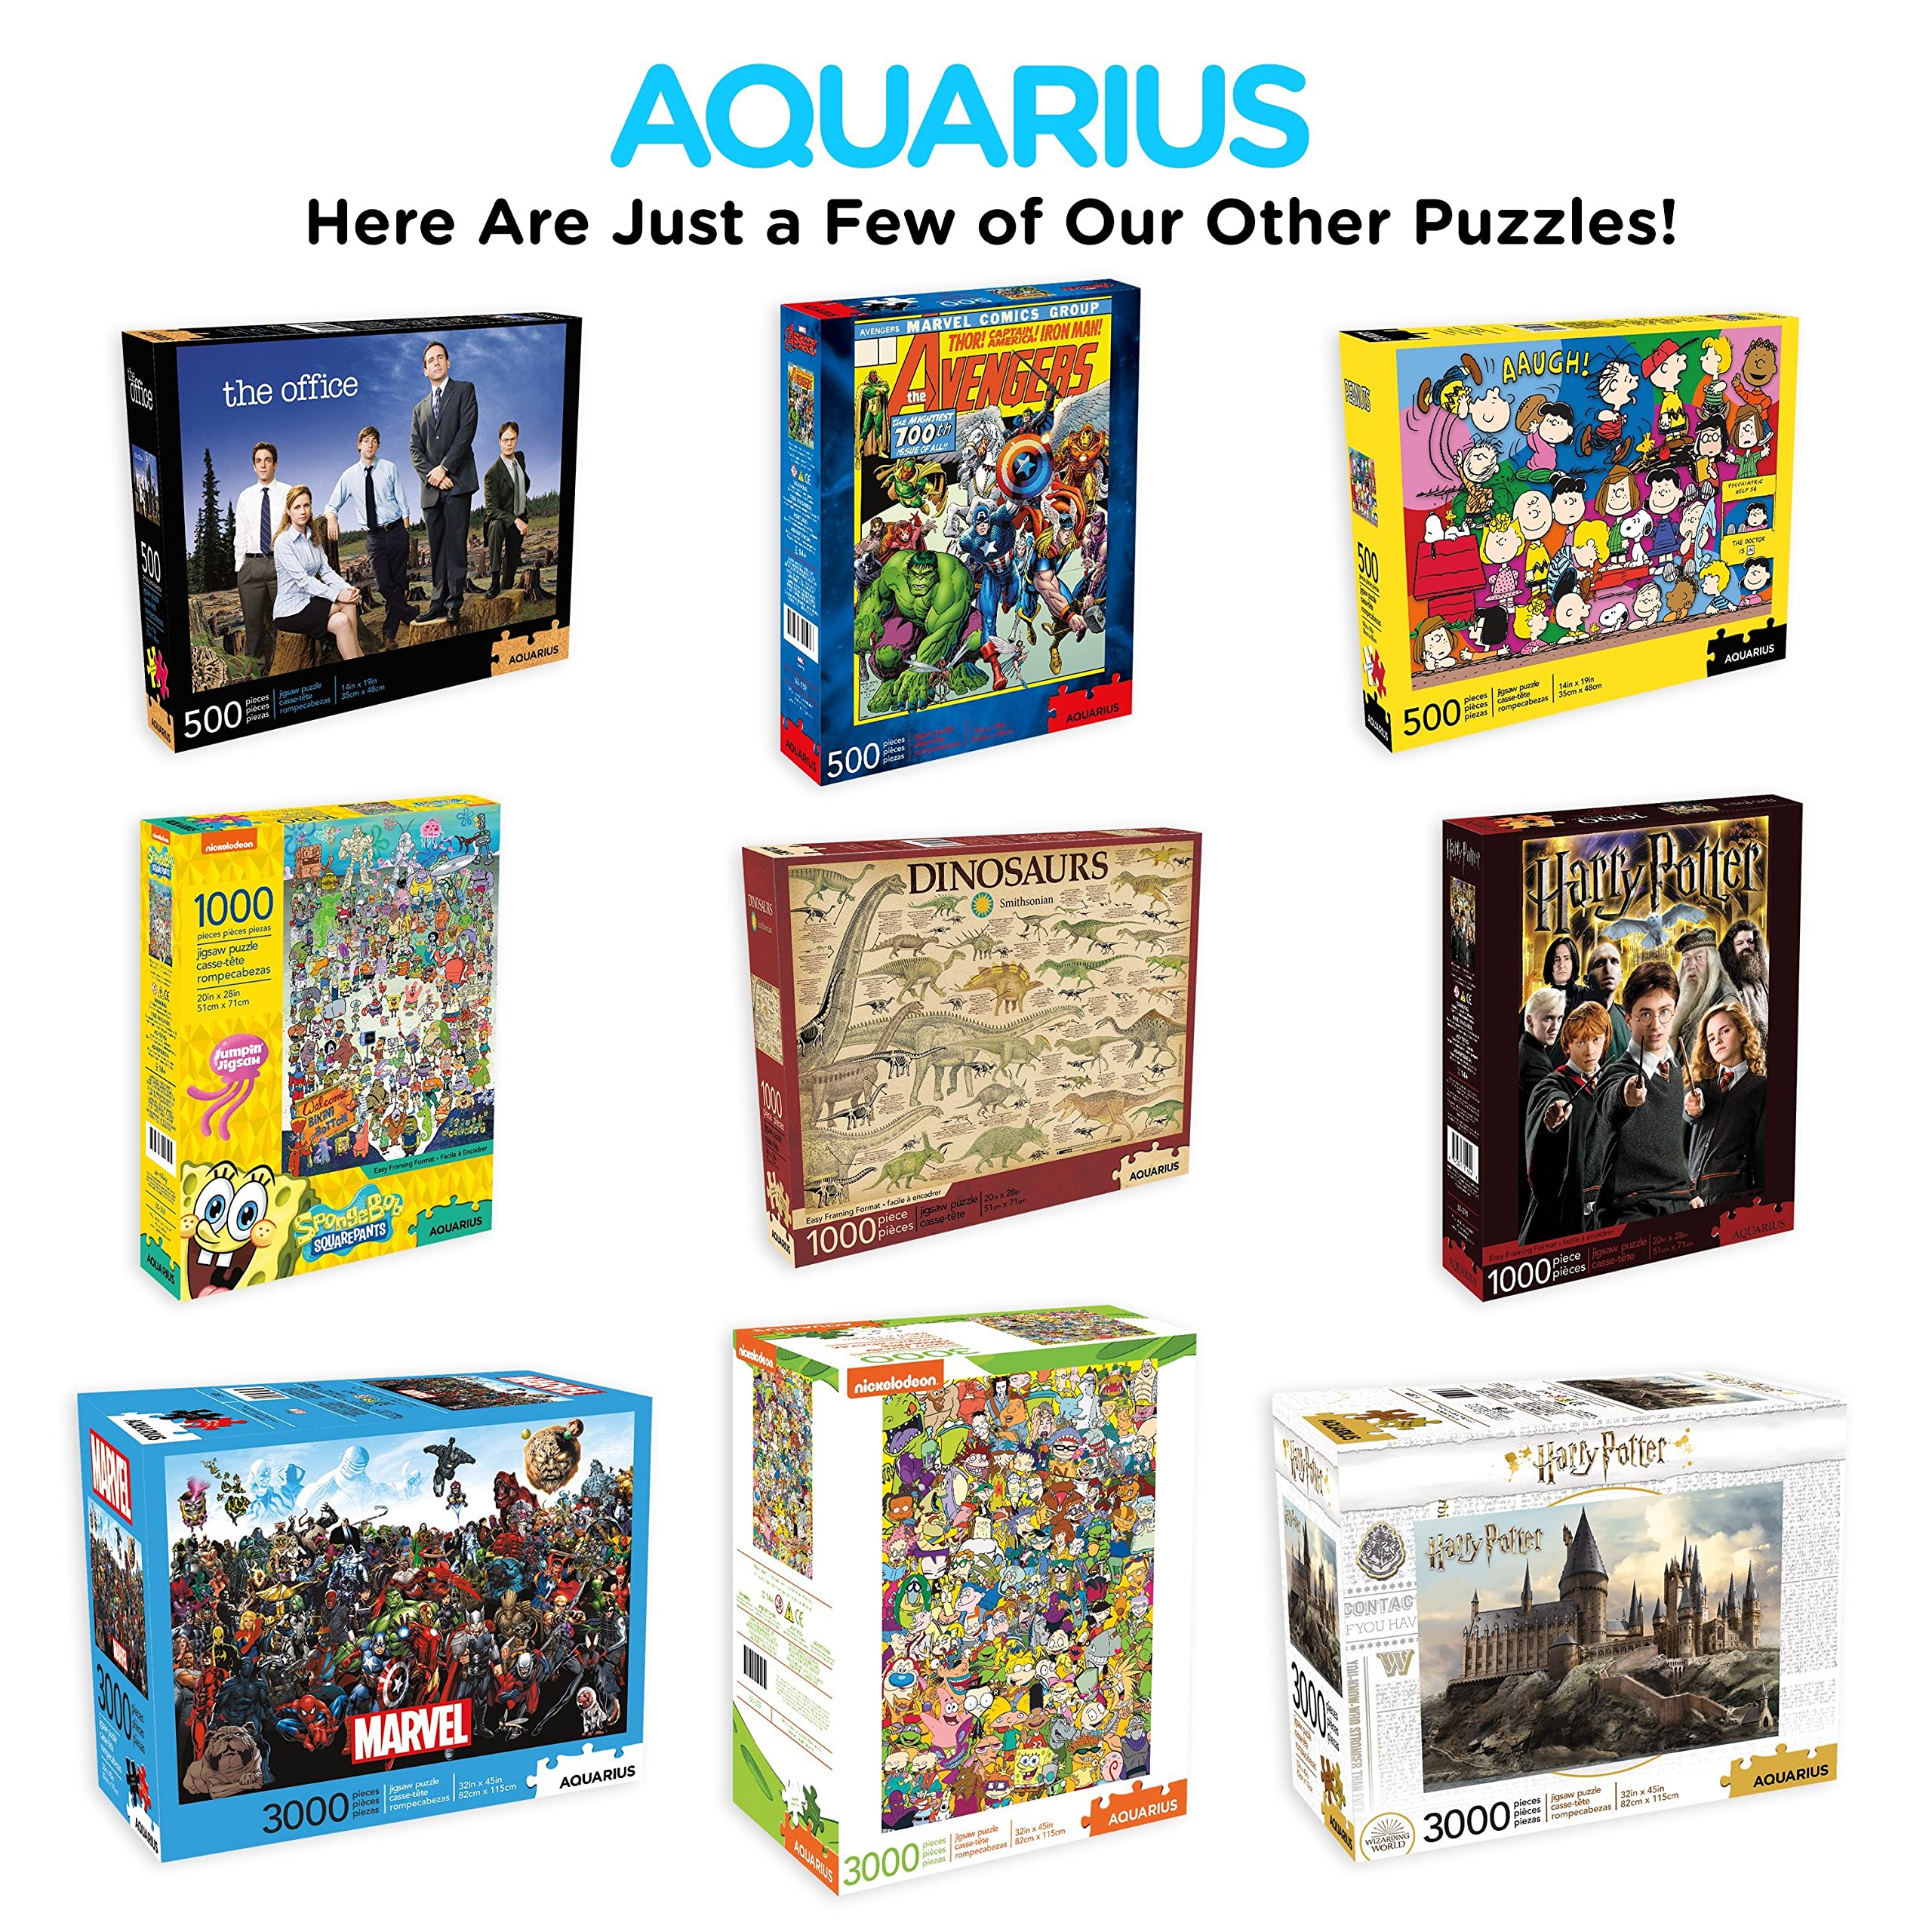 Aquarius Nickelodeon 90s Puzzle (3000 Piece Jigsaw Puzzle) - Officially Licensed Nickelodeon Merchandise & Collectibles - Glare Free - Precision Fit - 32 x 45 Inches